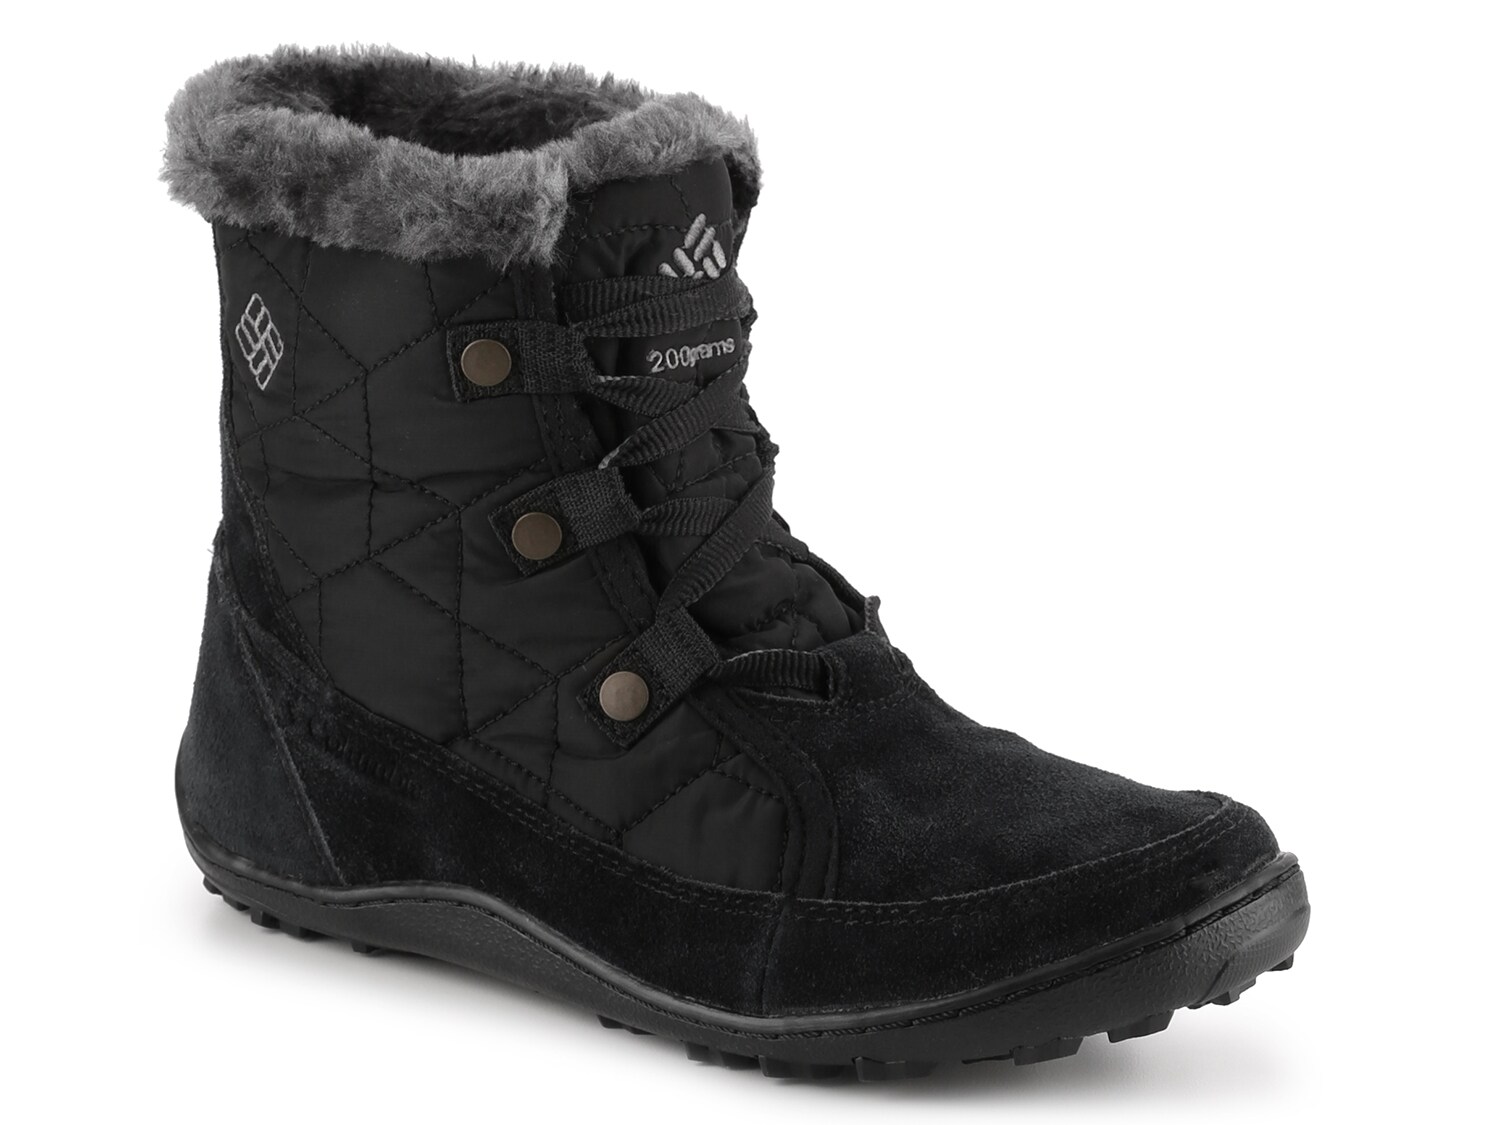 Columbia Minx Shorty Snow Boot - Women's - Free Shipping | DSW